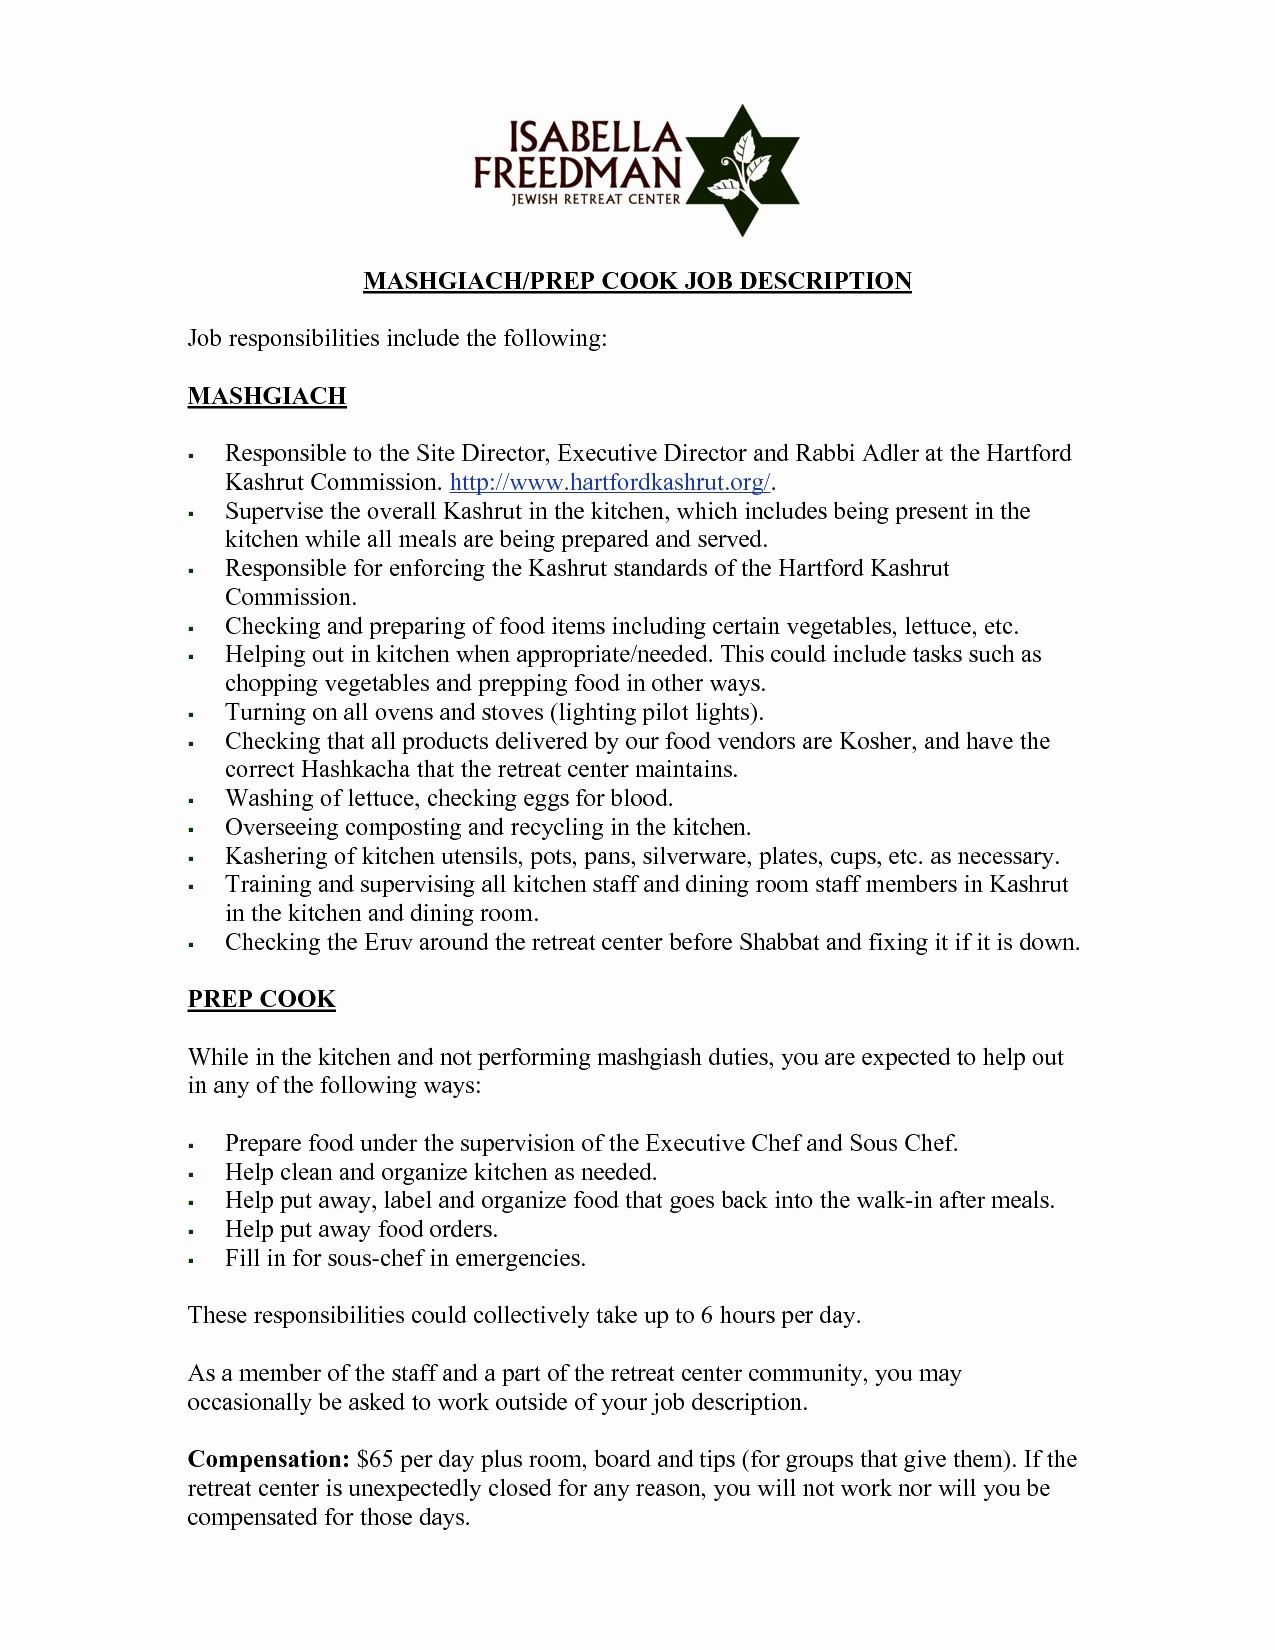 How To Fill Out A Resume Sample Application Letter For Job Order New Resume Doc Template Of Cover Letter Template Fill In how to fill out a resume|wikiresume.com